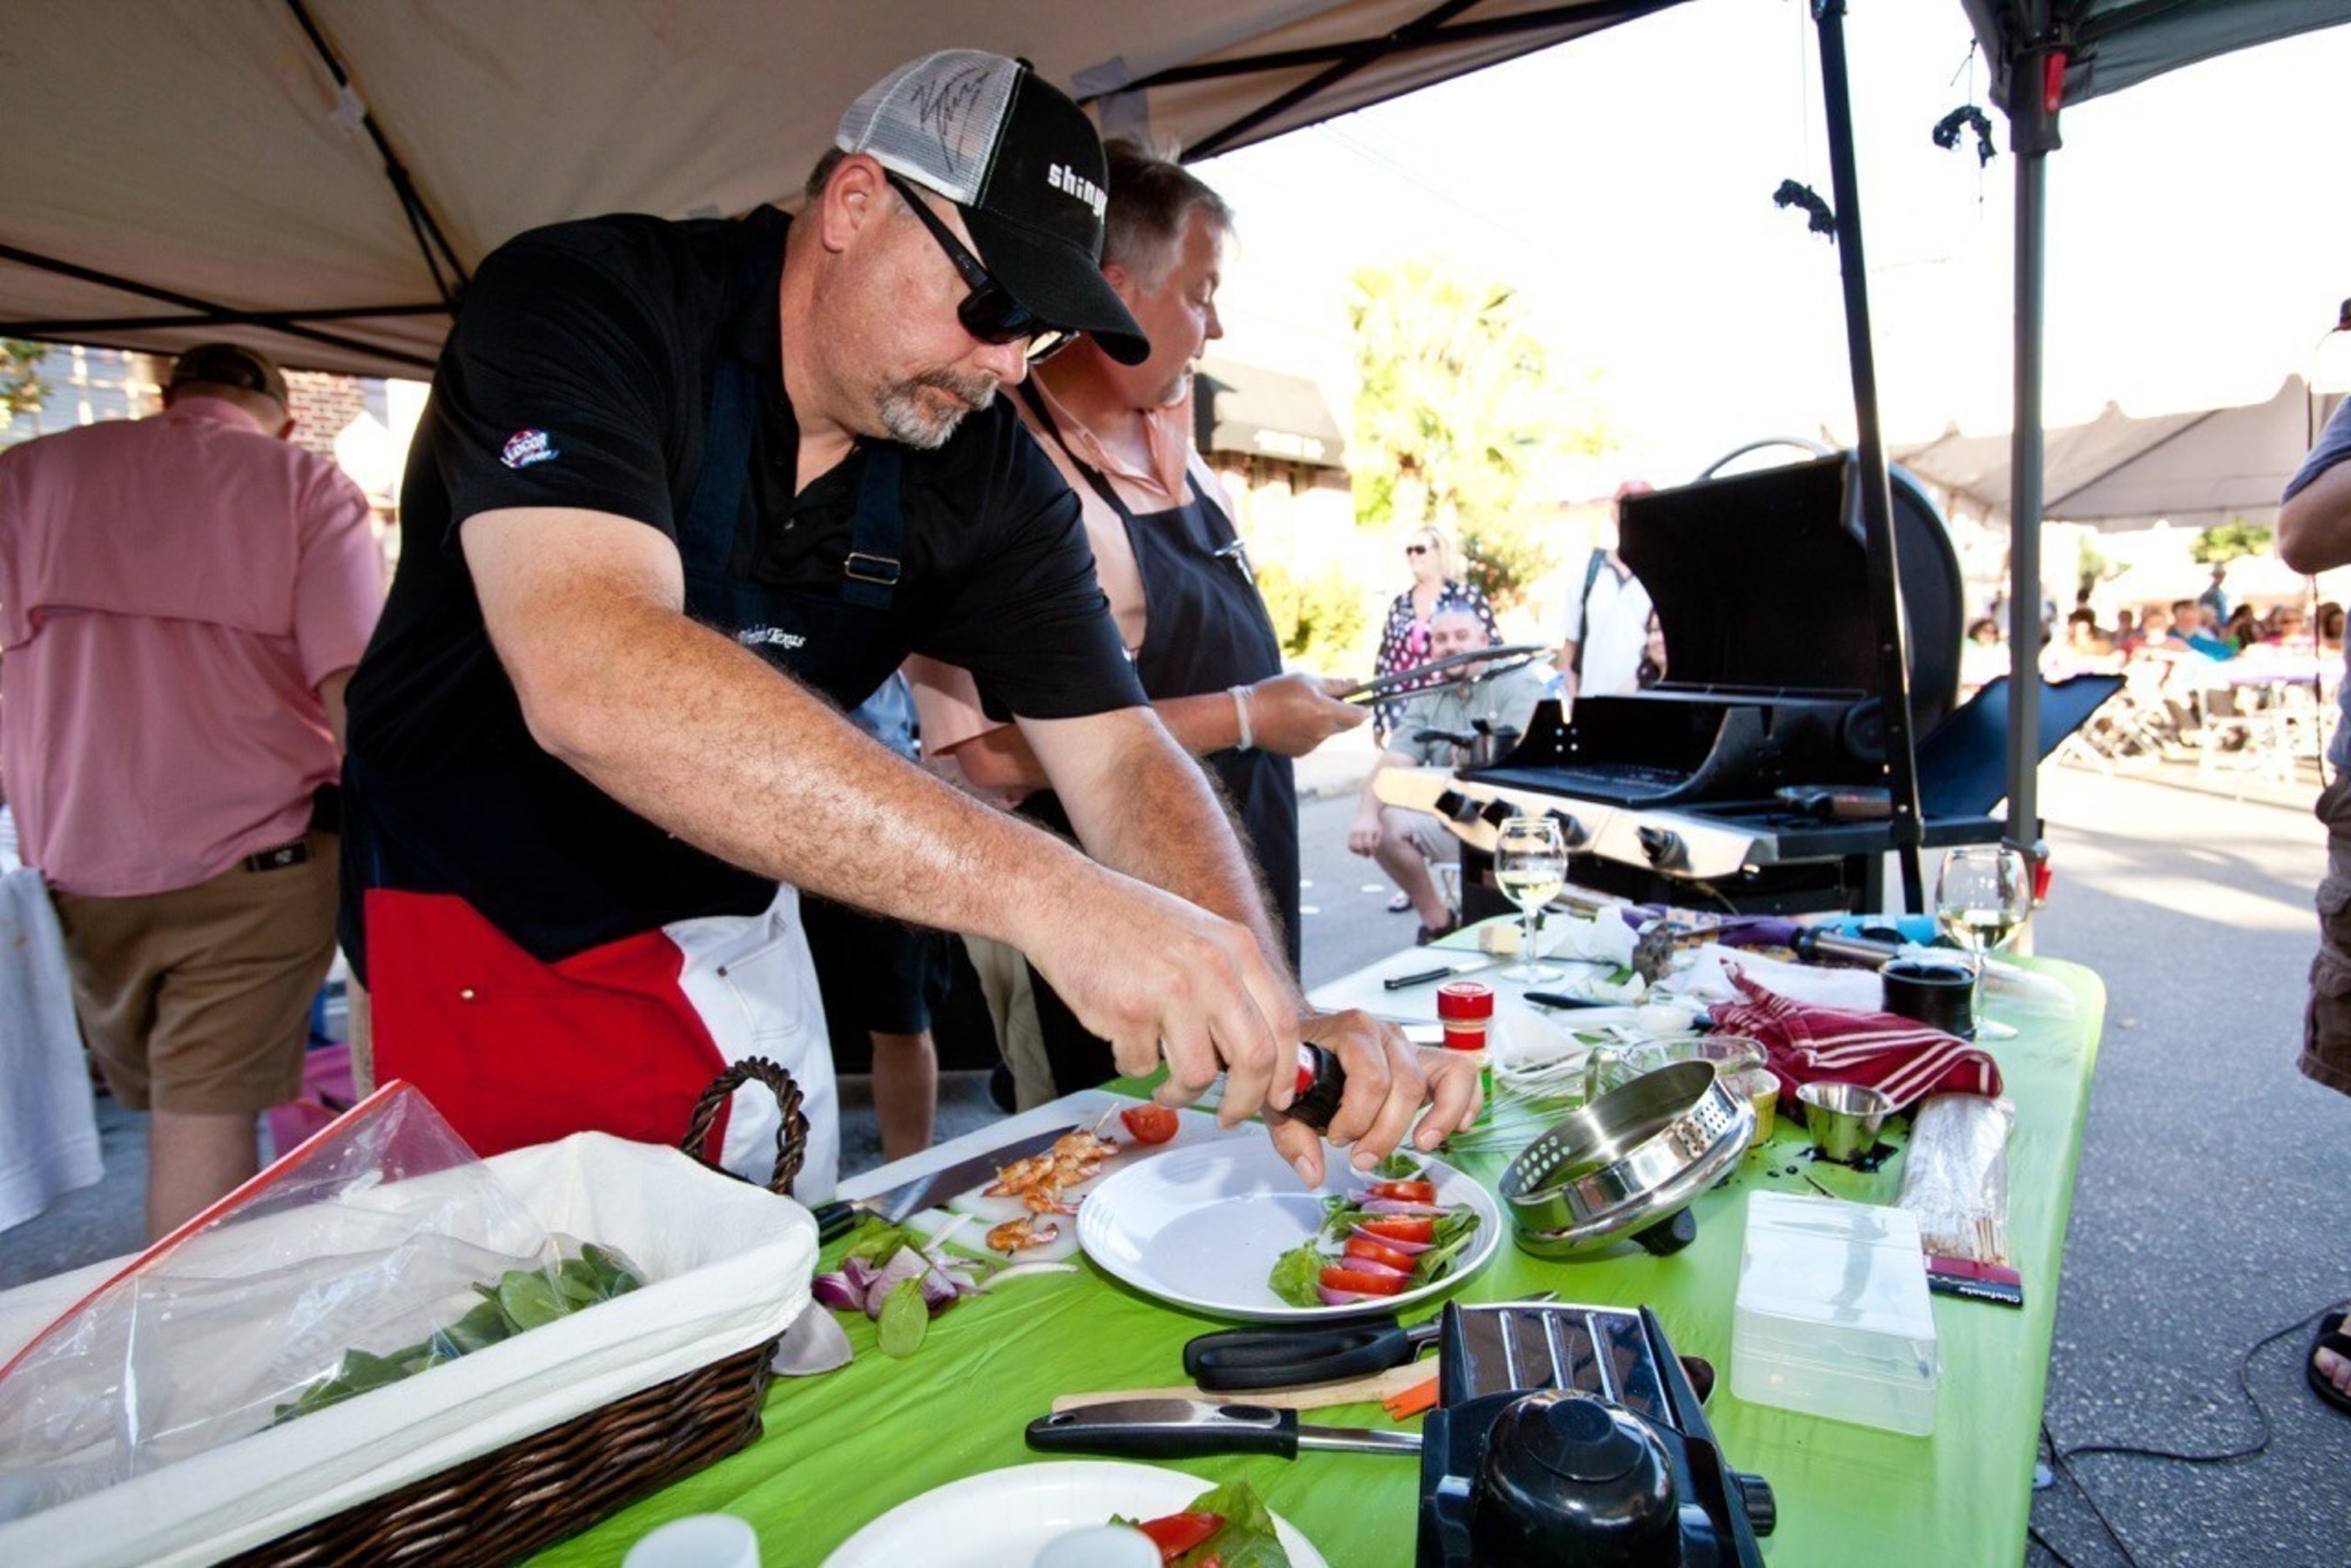 New Braunfels, Texas, in the heart of the Texas Hill Country, kicks off the summer vacation season May 7. Chef Brad Sorenson judges the Wein and Saengerfest Chef Showdown to get it started. The city is a growing culinary destination with many new restaurants, a thriving farmers market, and specialty food shops. Along with wine and craft beer tasting, there is live music, of course. There's also a grape stomp, artisan market, activities for children and a Chef's Showdown. It all culminates with a street...